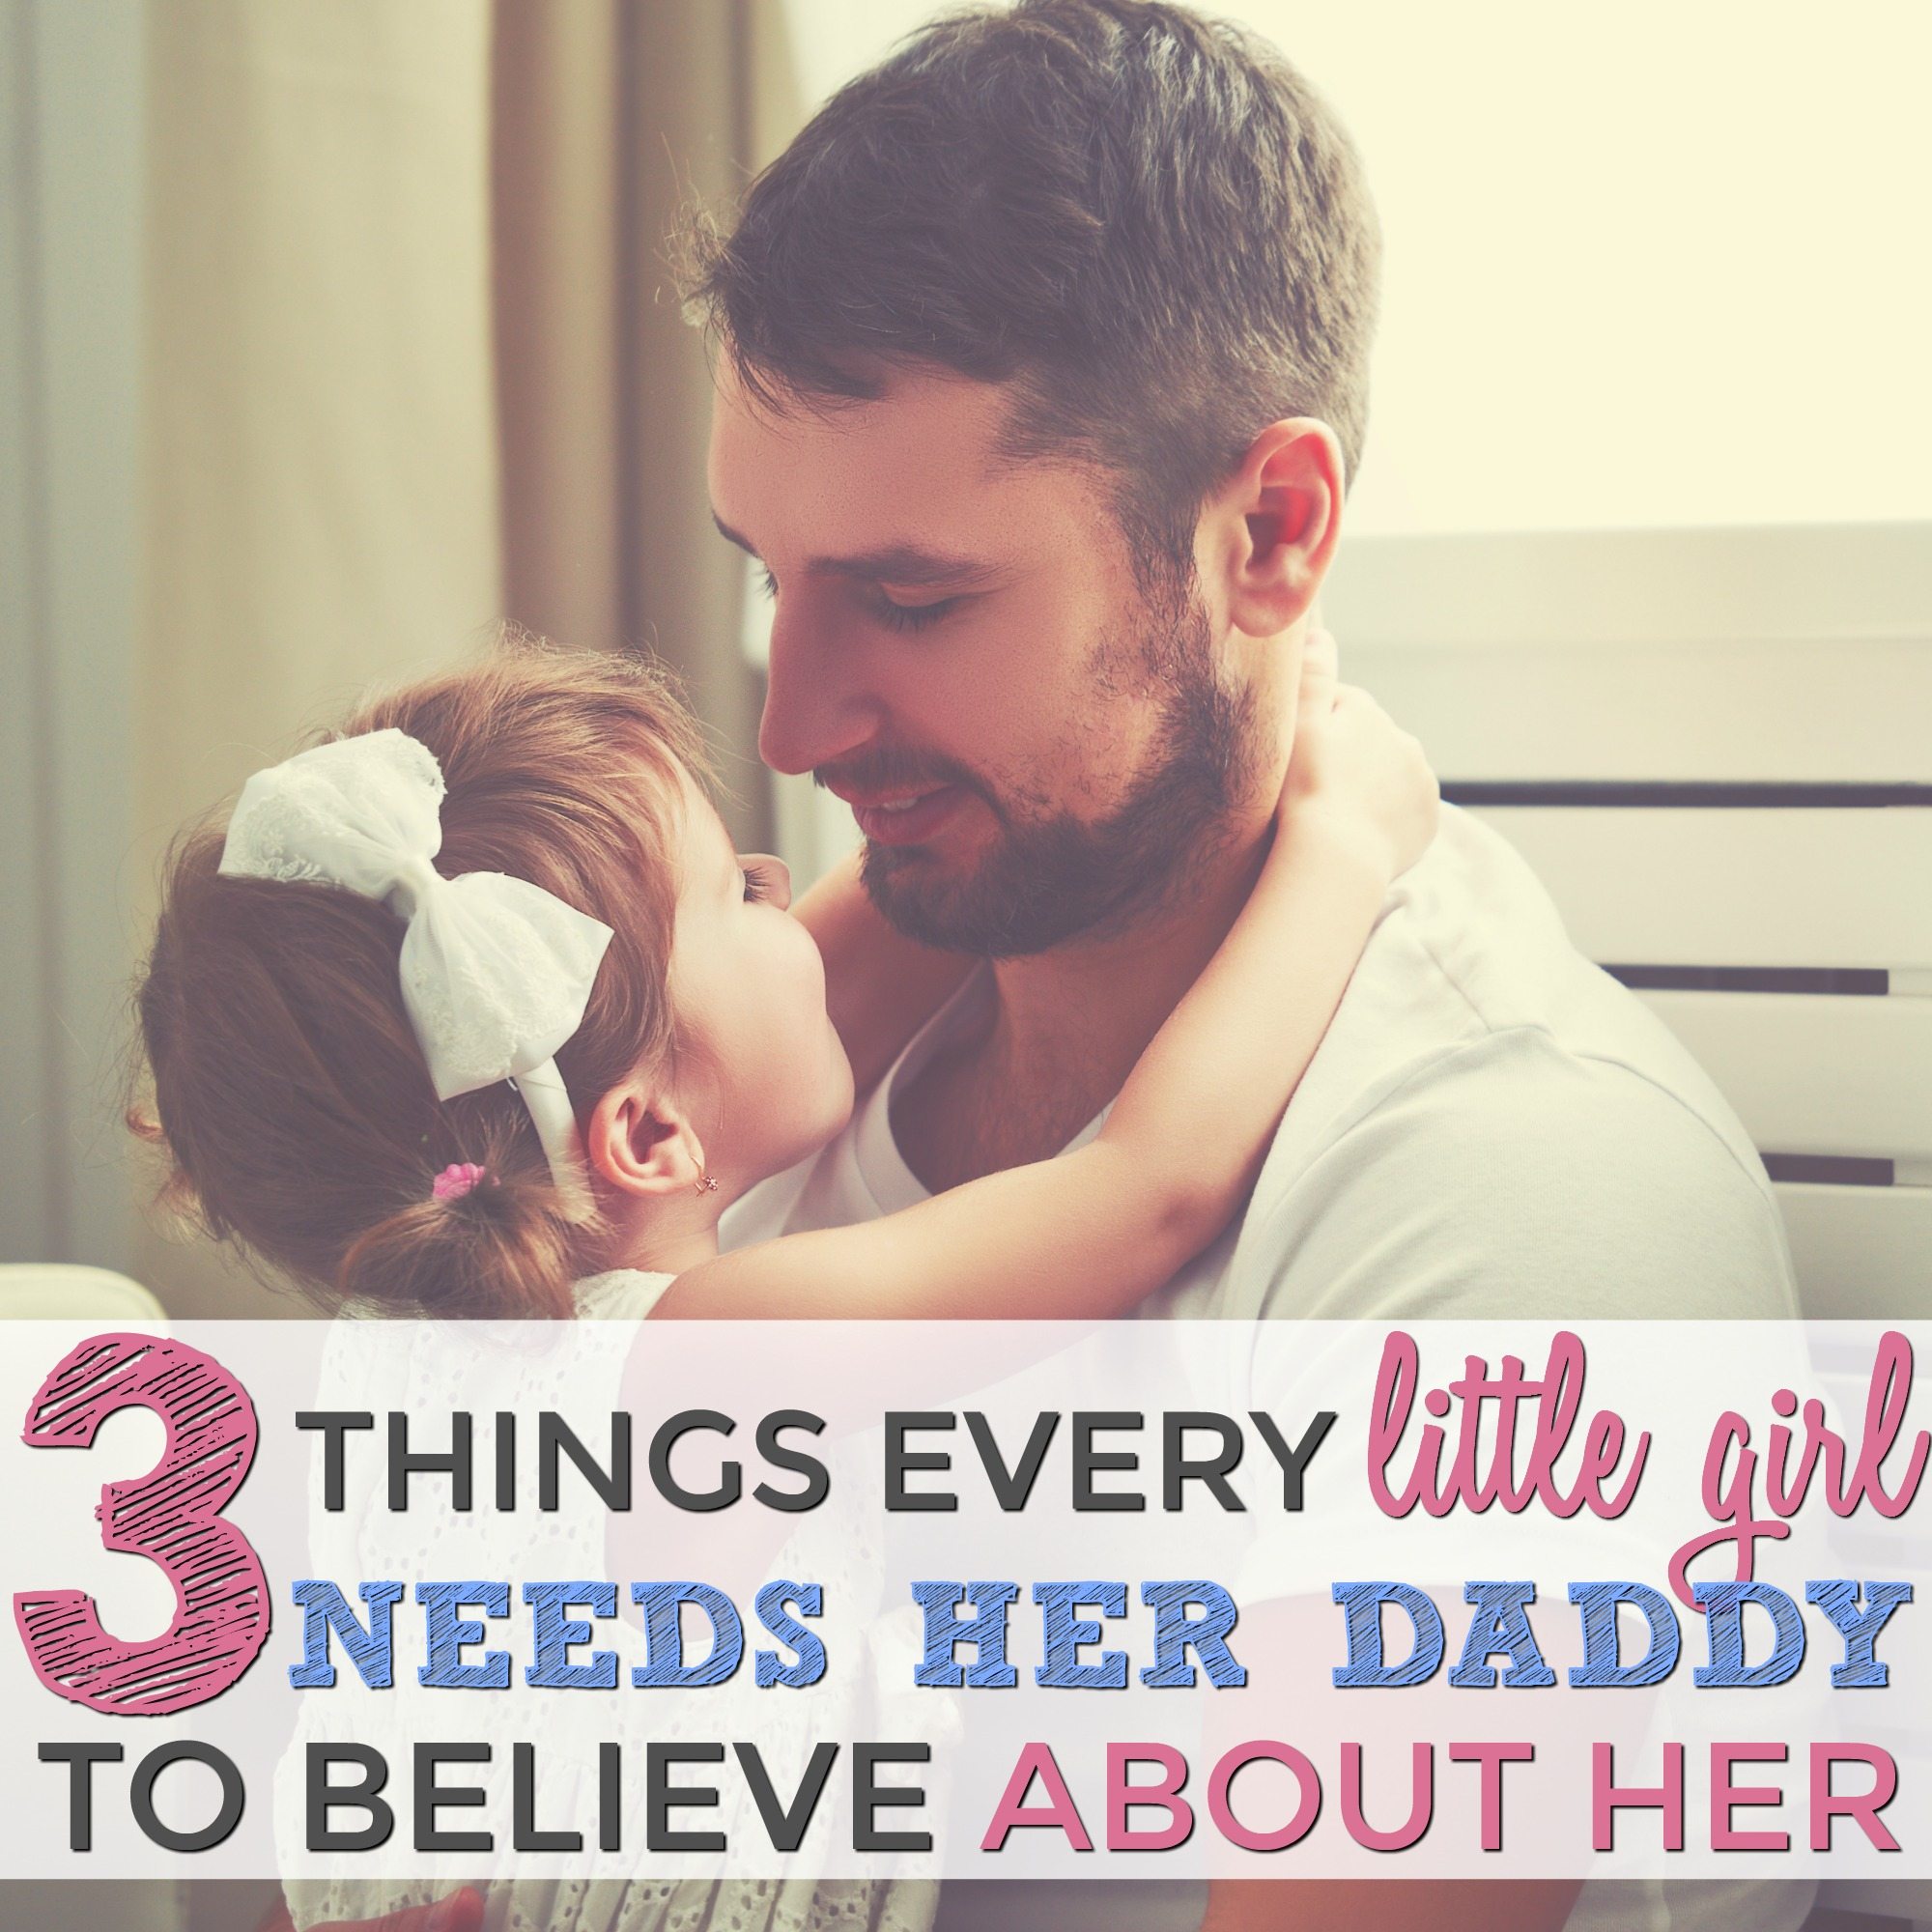 3 Things Every Little Girl Needs Her Daddy to Believe About Her